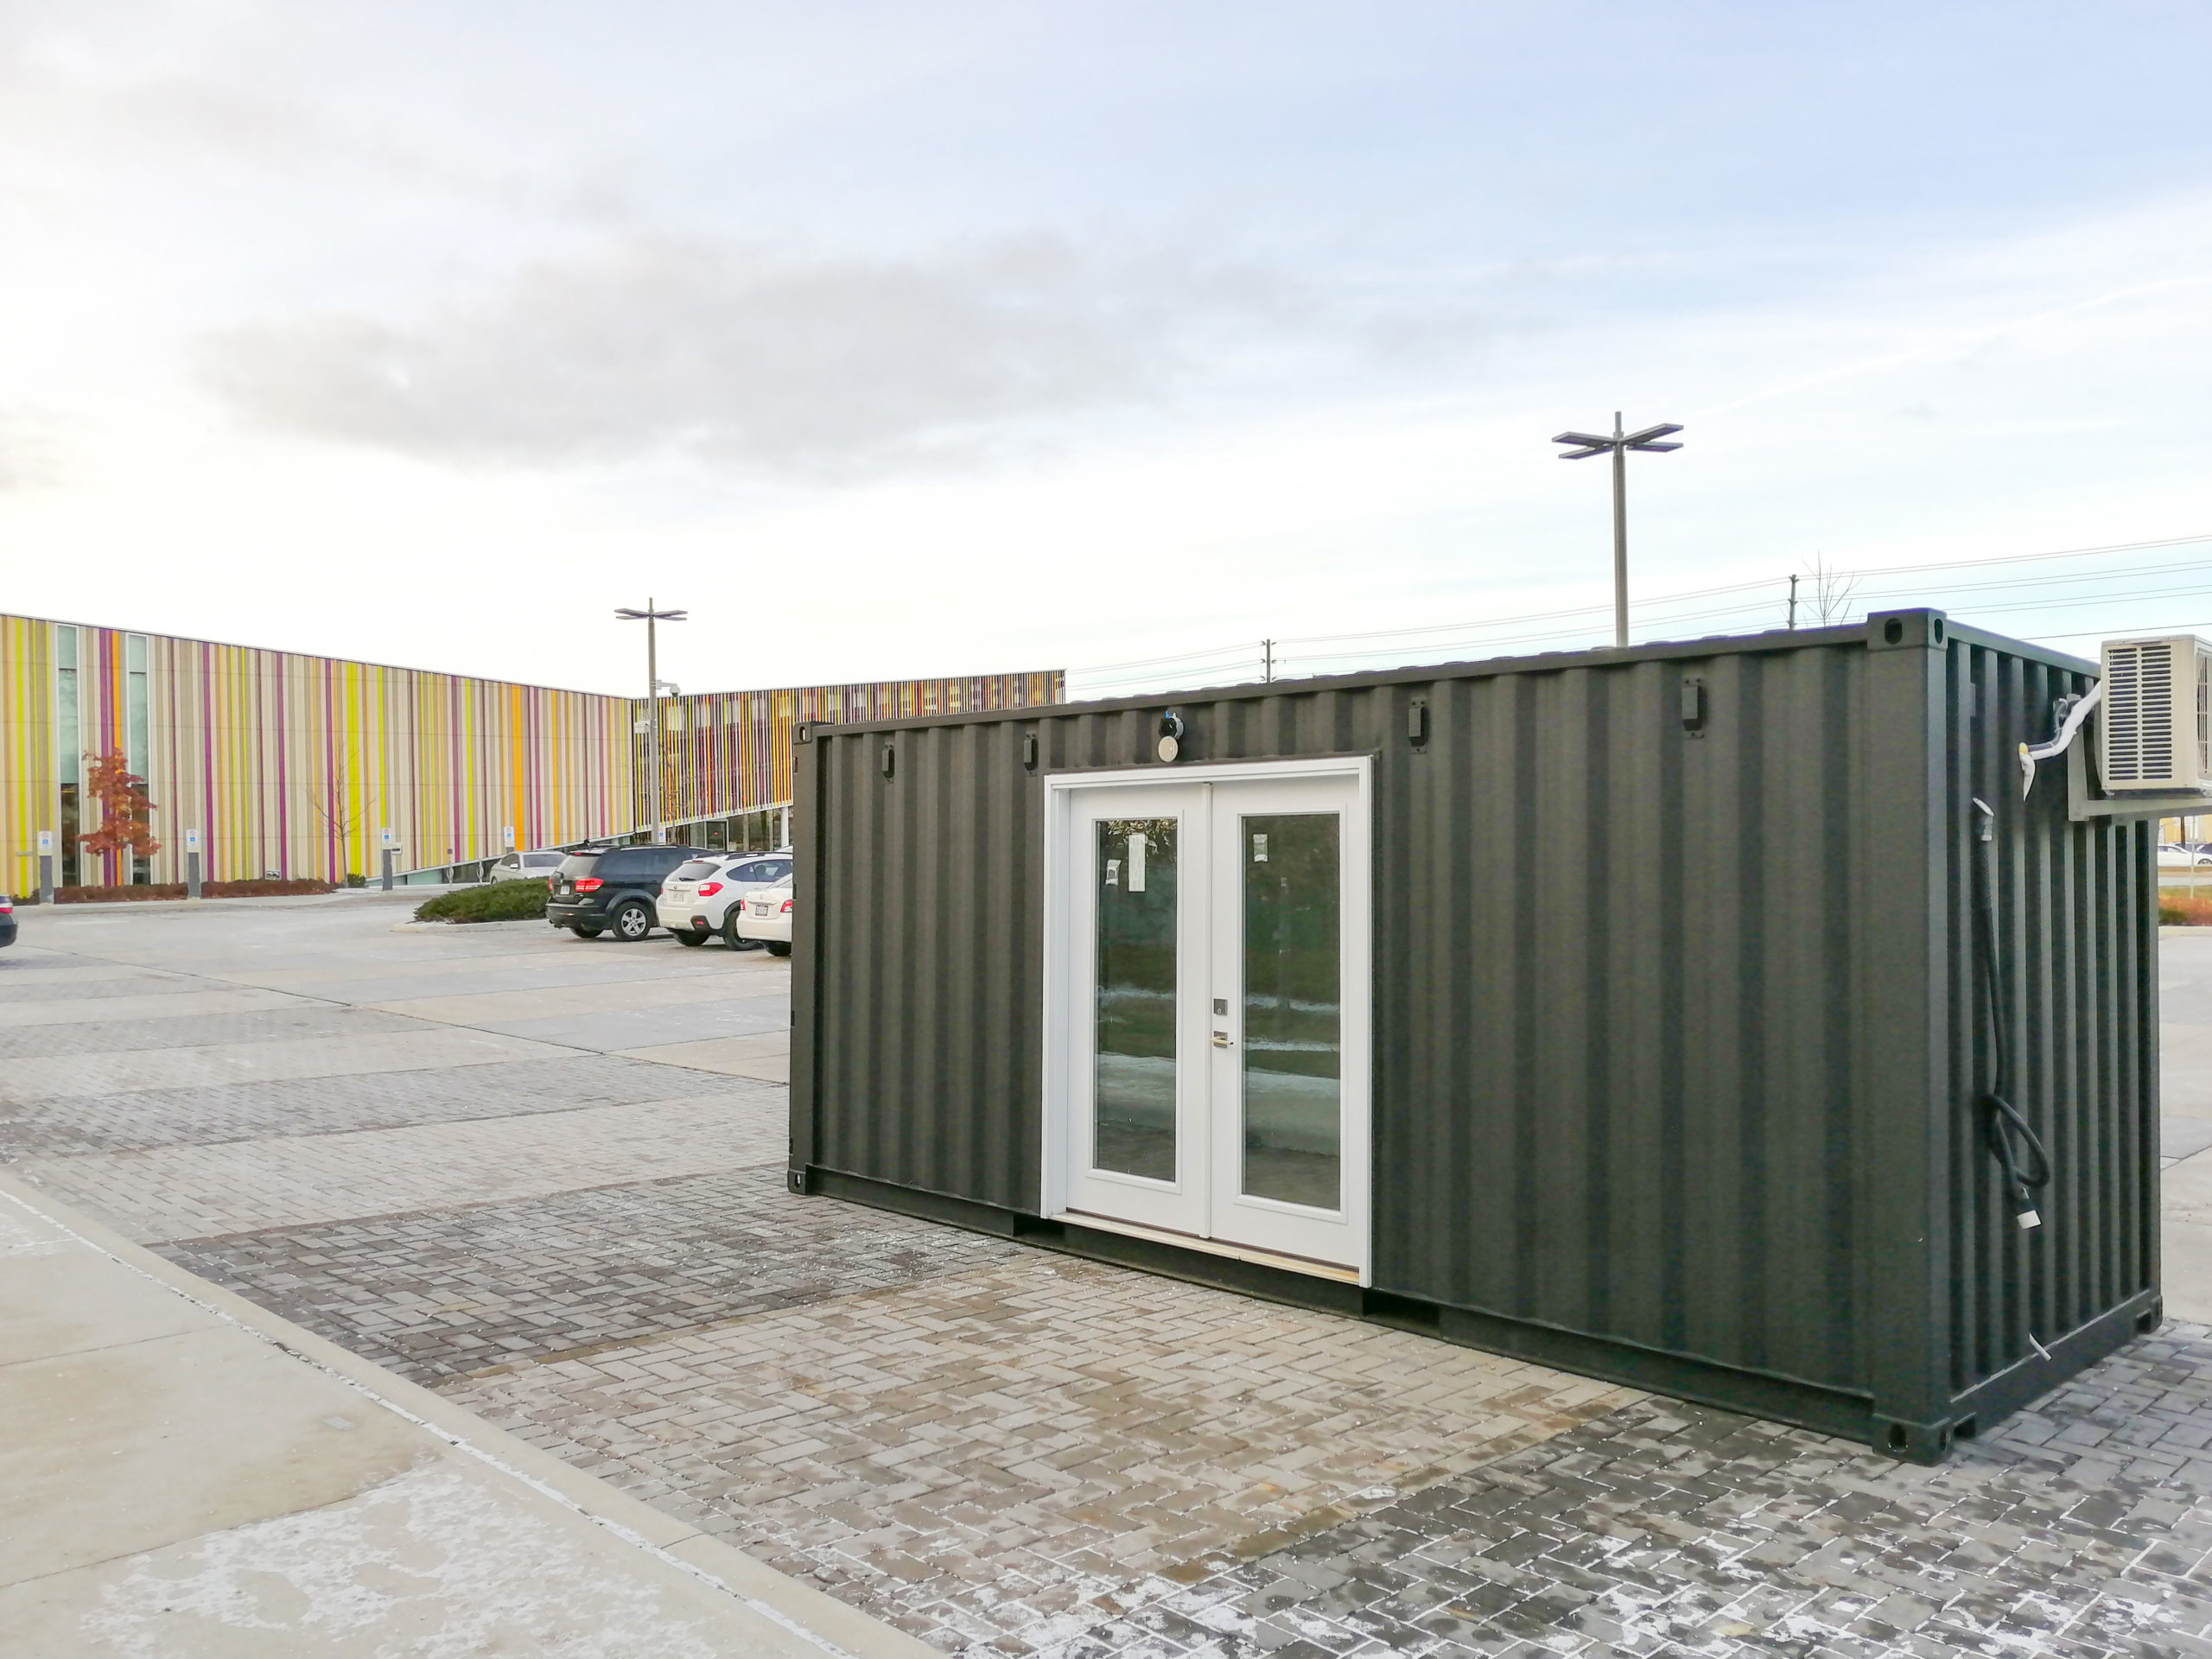 Landscape photo of a black shipping container with white doors, sitting in a parking lot.